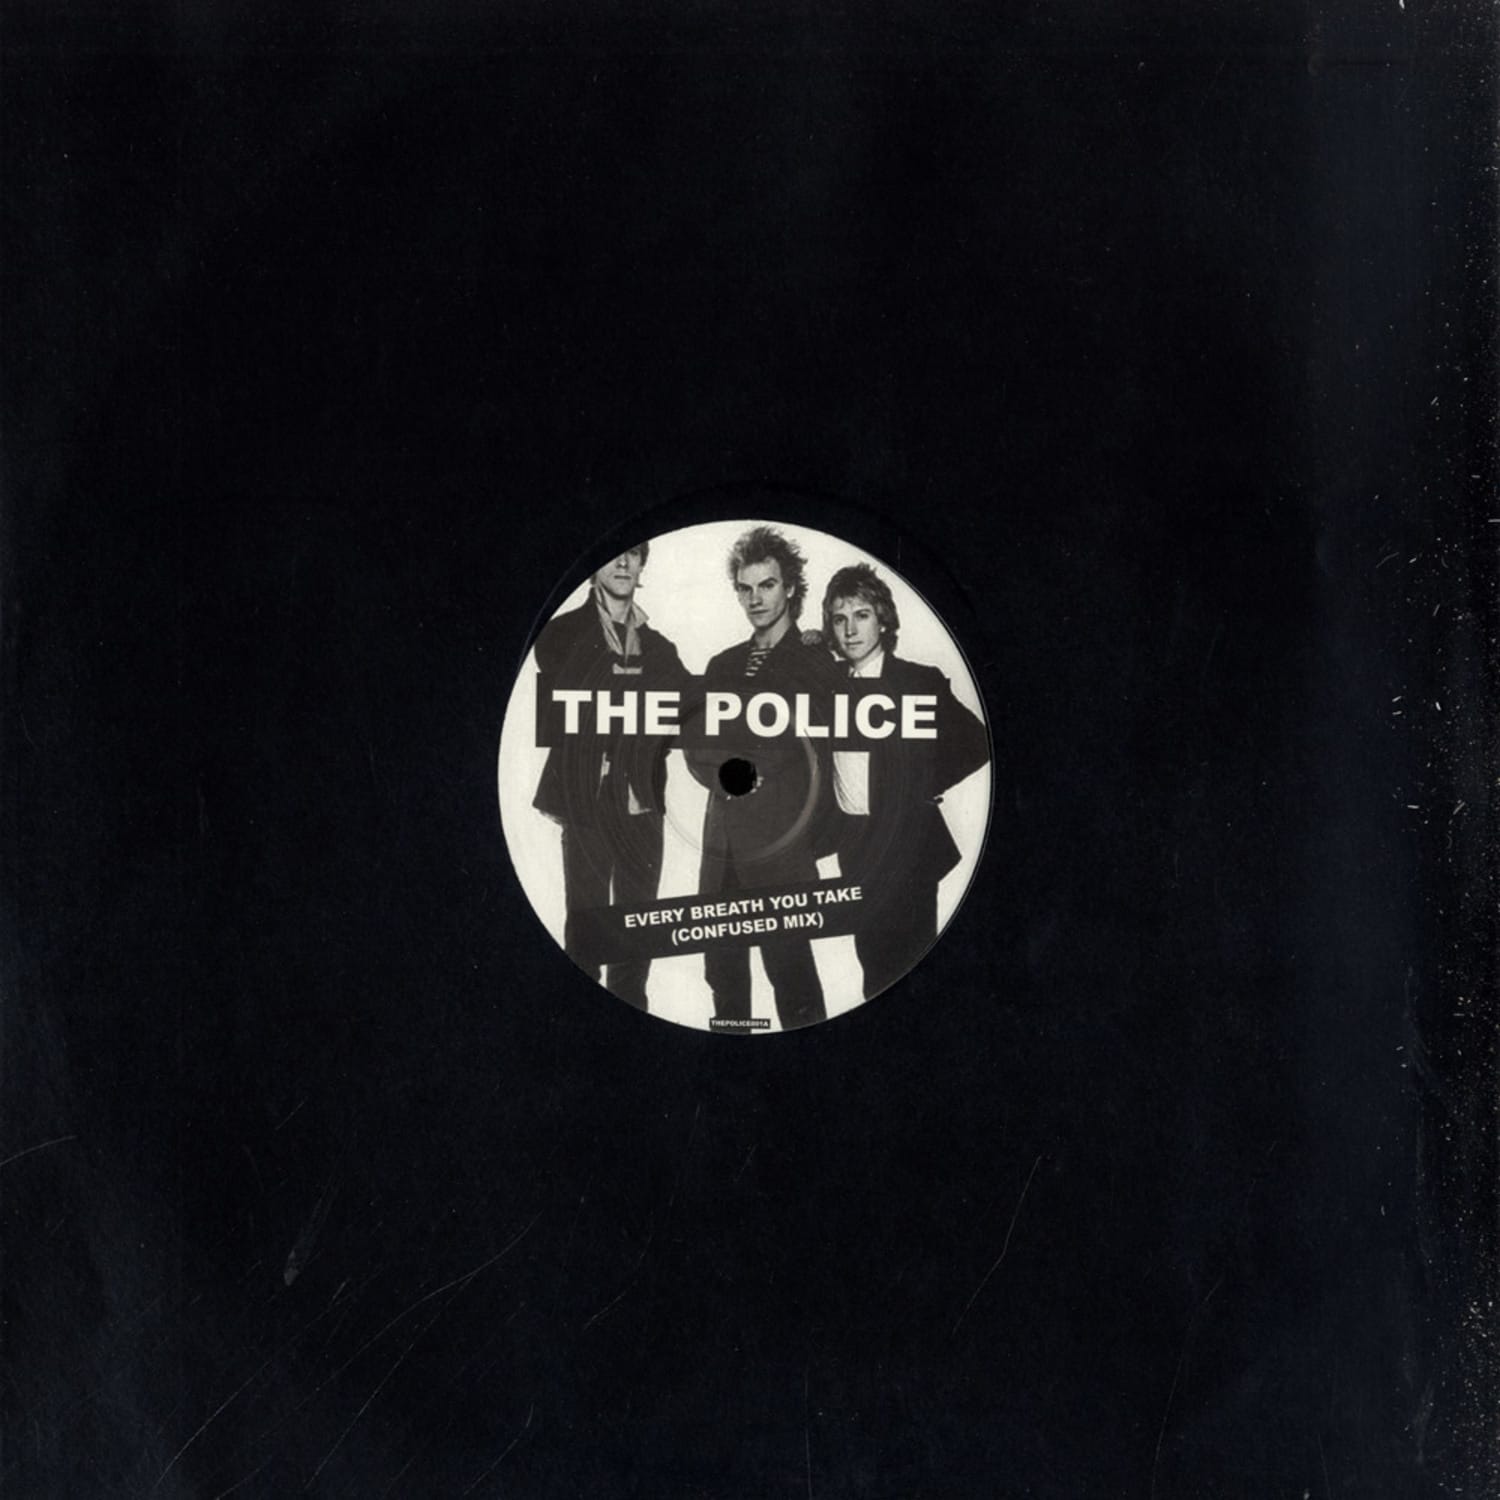 The Police - EVERY BREATH YOU TAKE